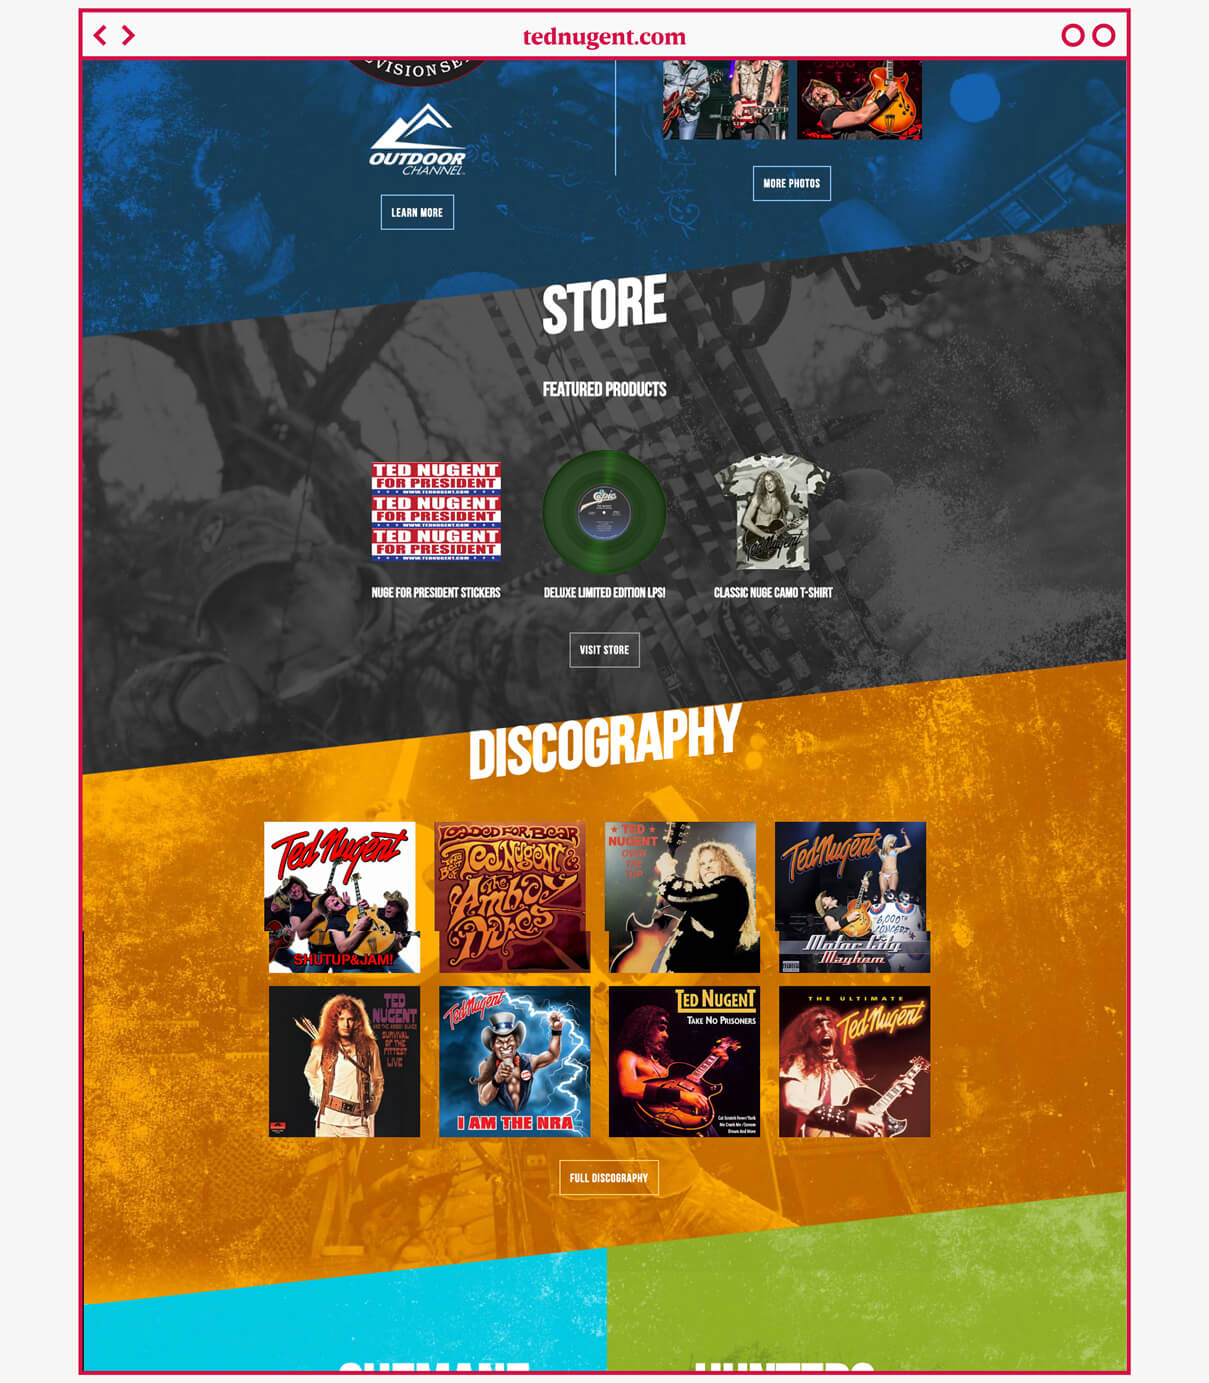 Store and Discography sections website design for tednugent.com website for Ted Nugent